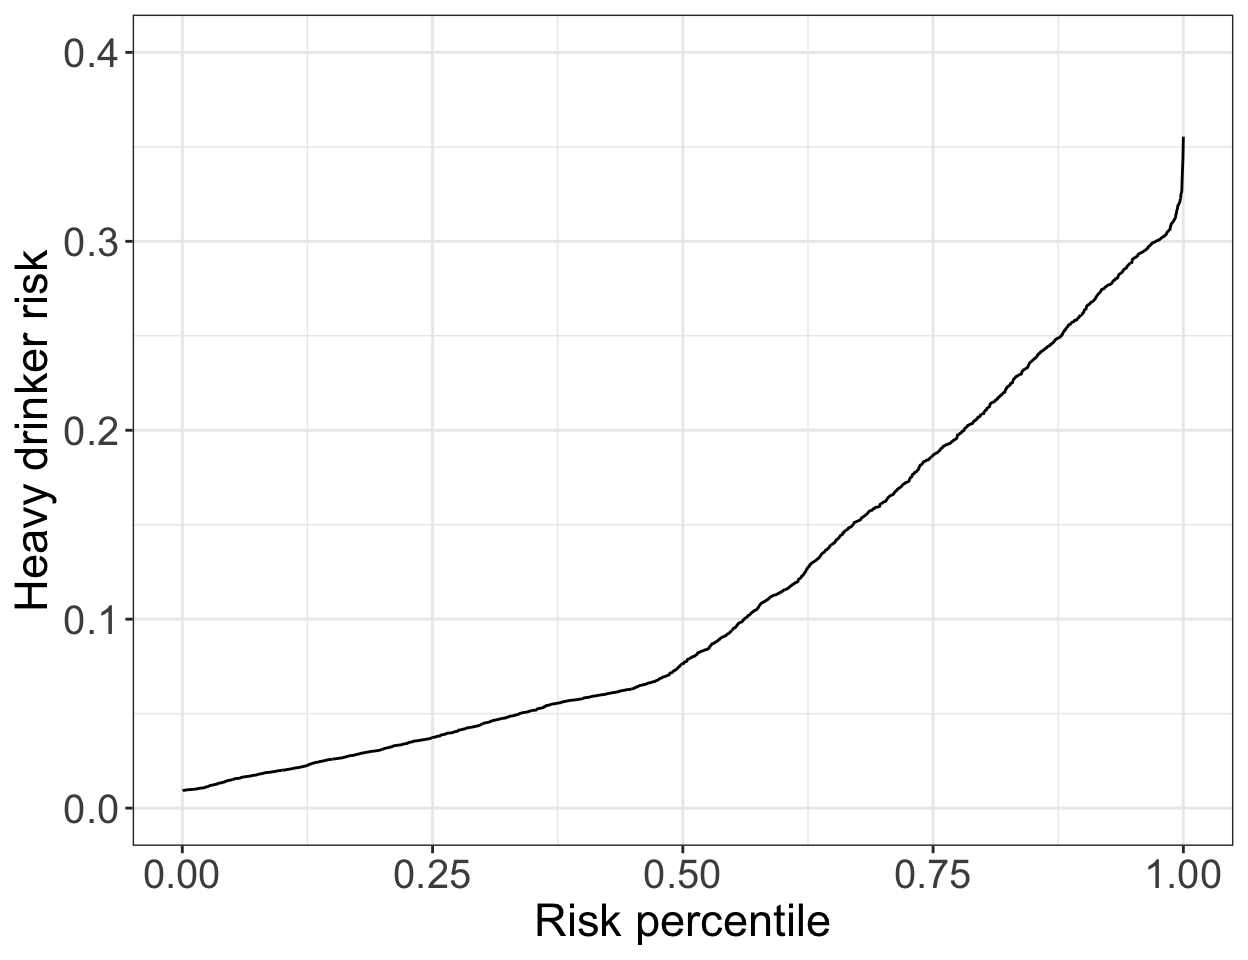 Predictiveness curve for model for heavy drinking with gender, age, and BMI as covariate